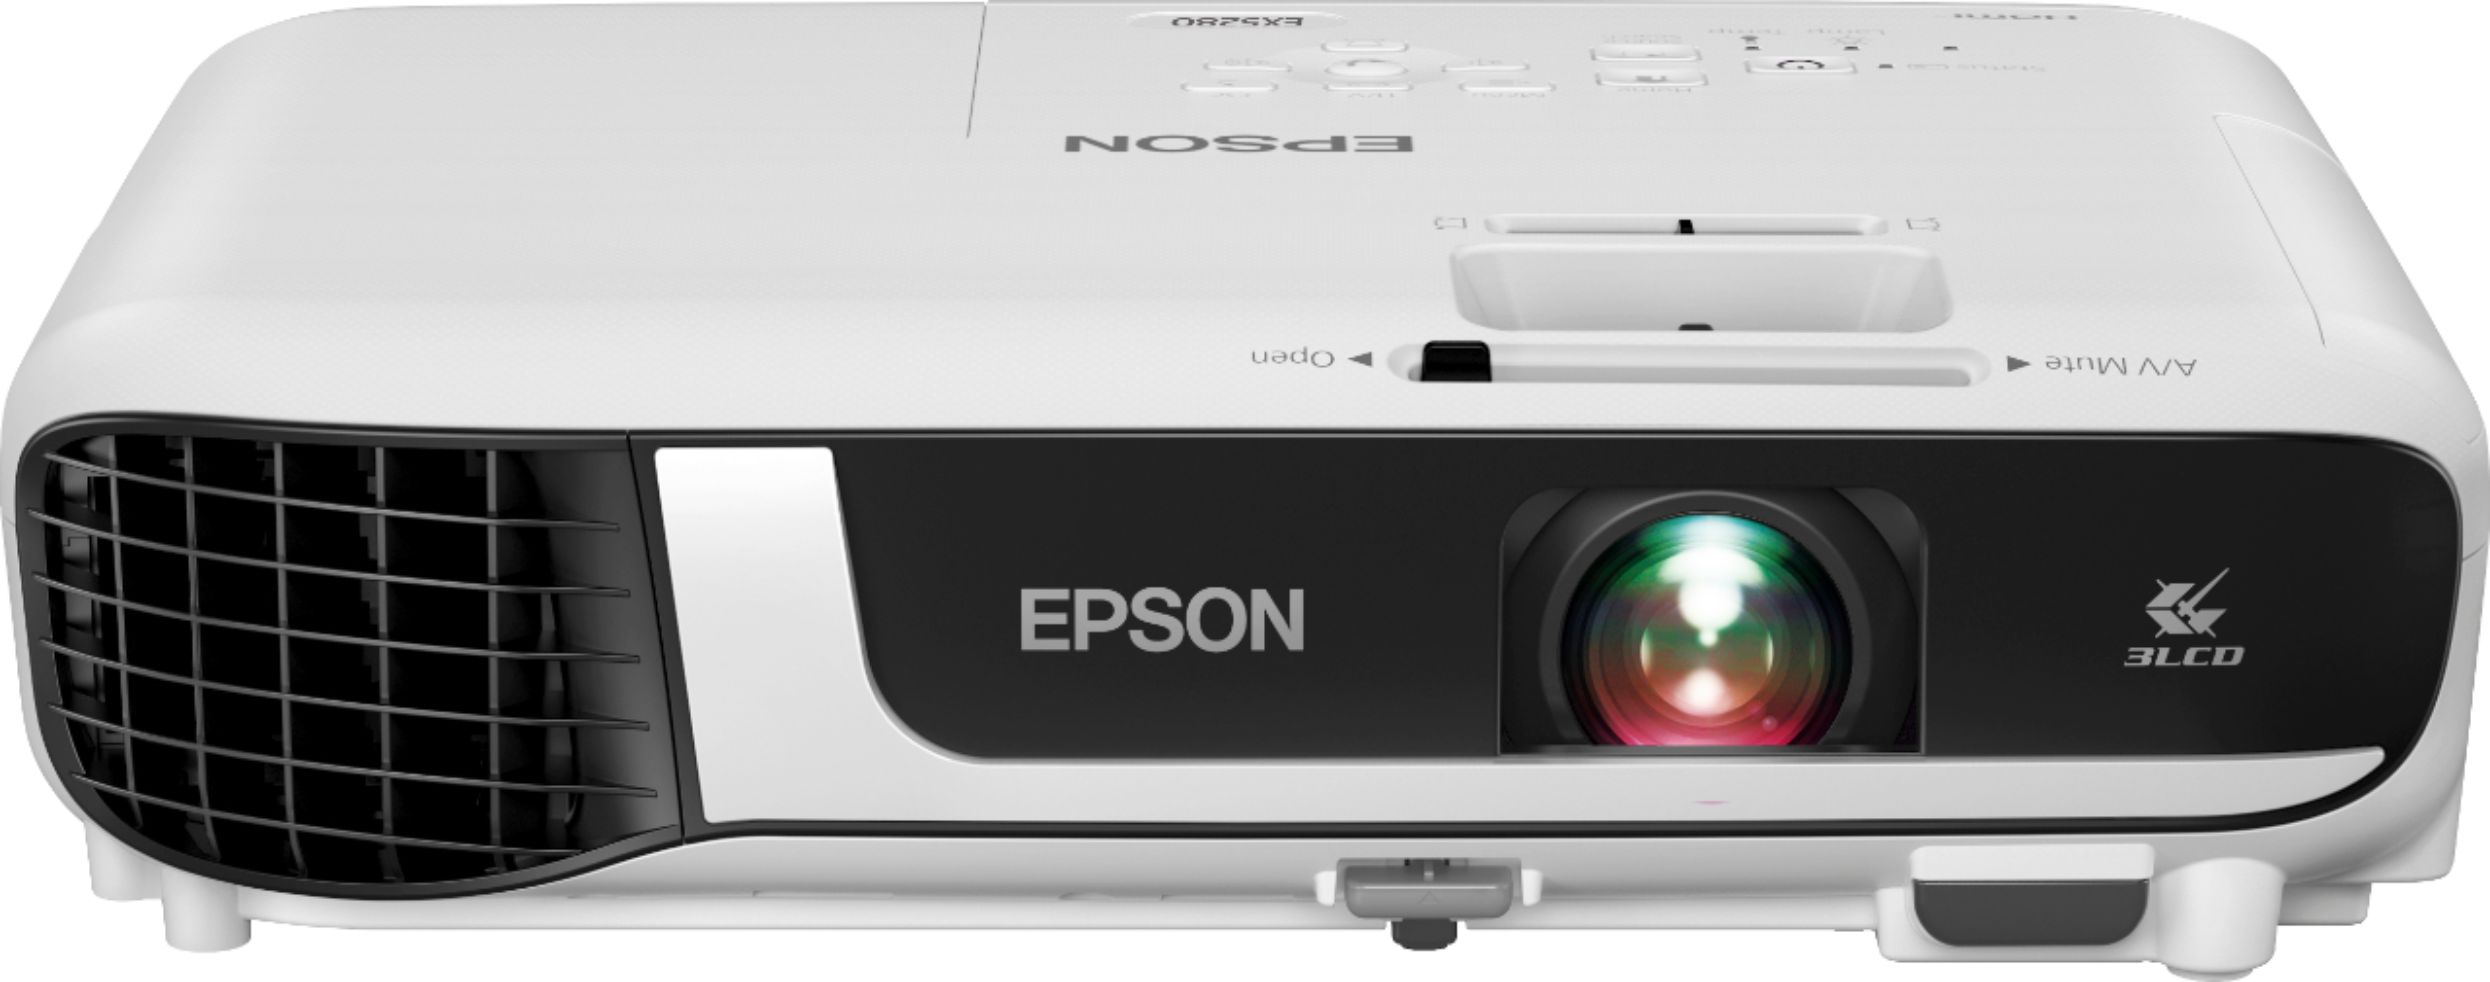 Epson EX5280 3LCD XGA Projector with Built-in Speaker